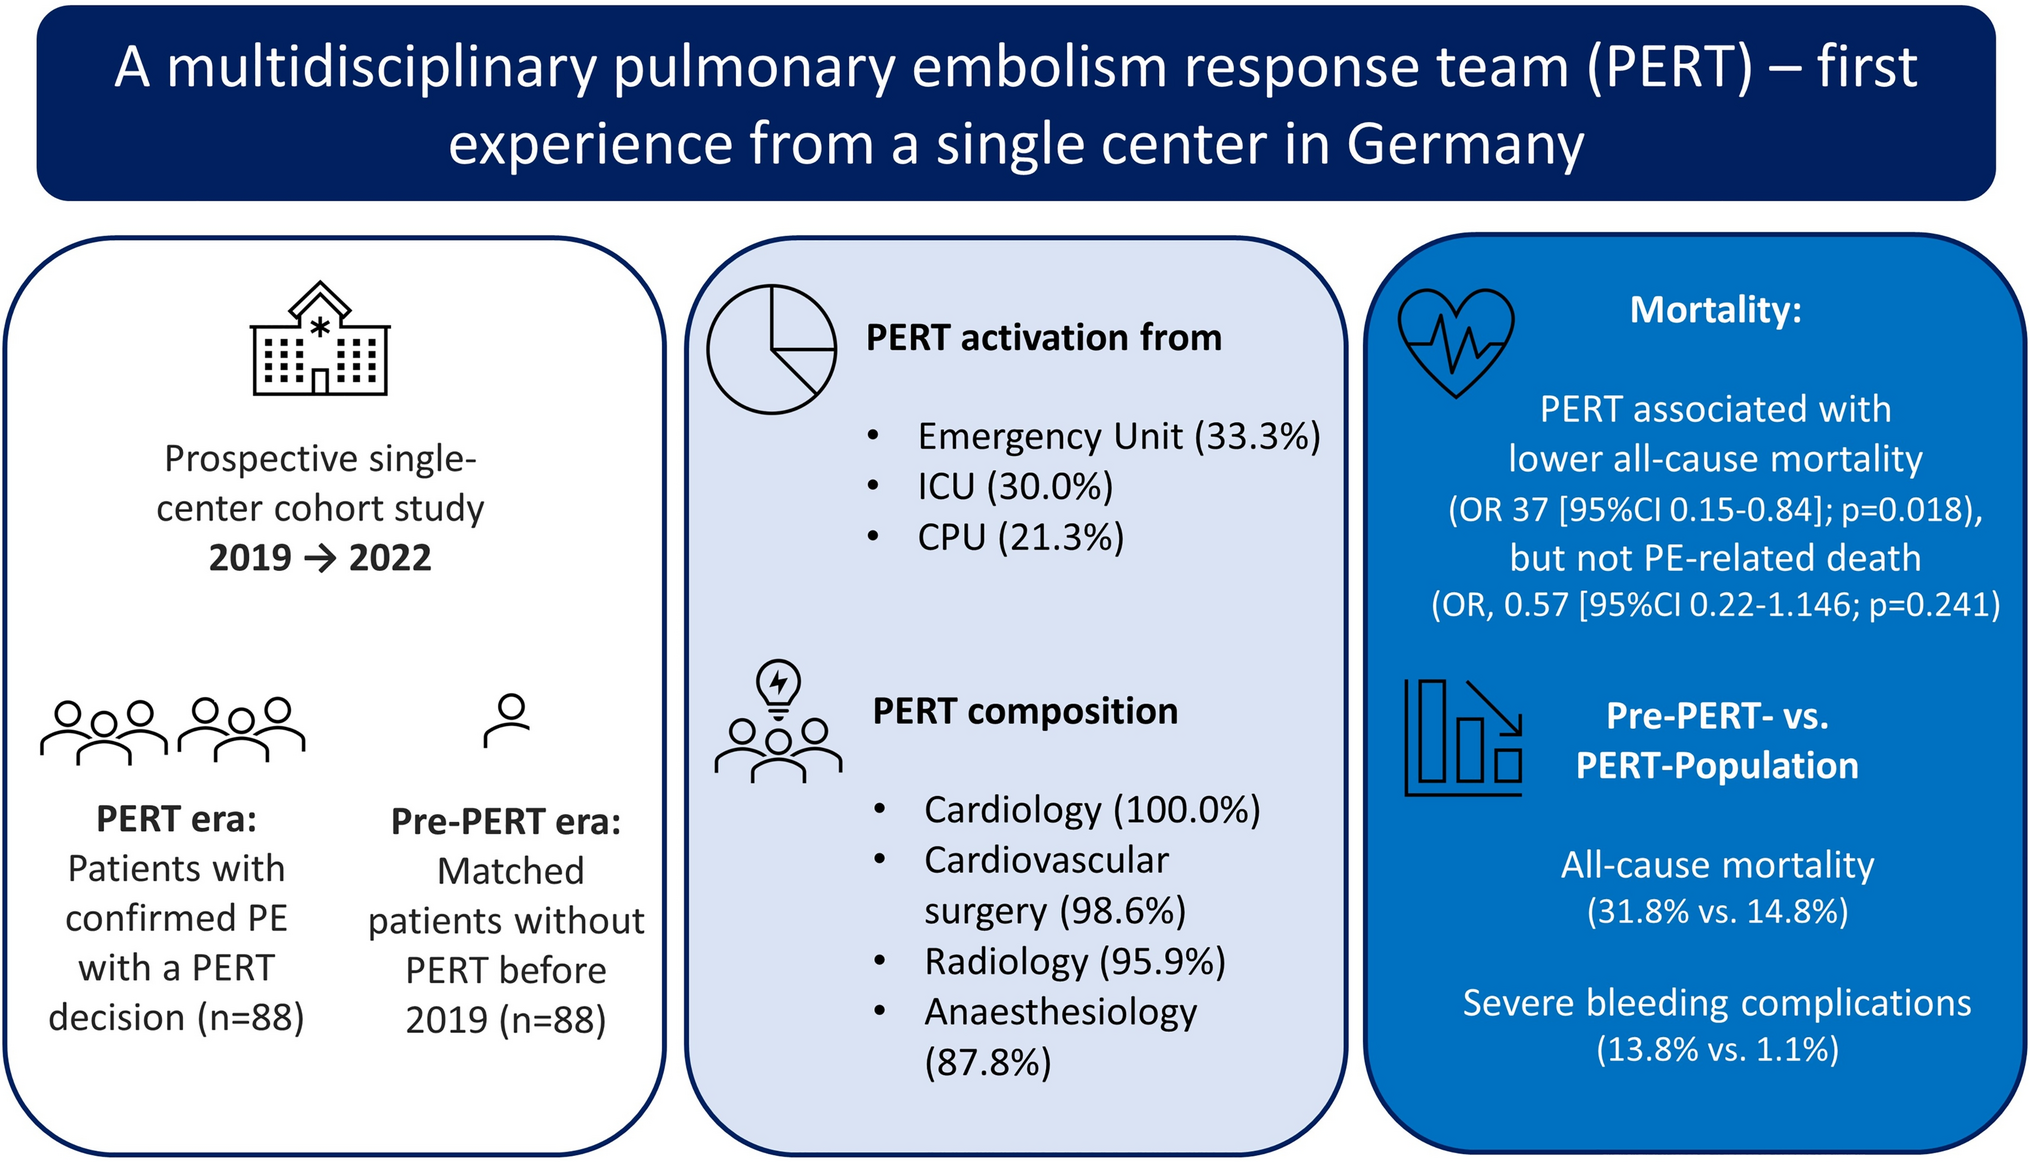 A multidisciplinary pulmonary embolism response team (PERT): first experience from a single center in Germany